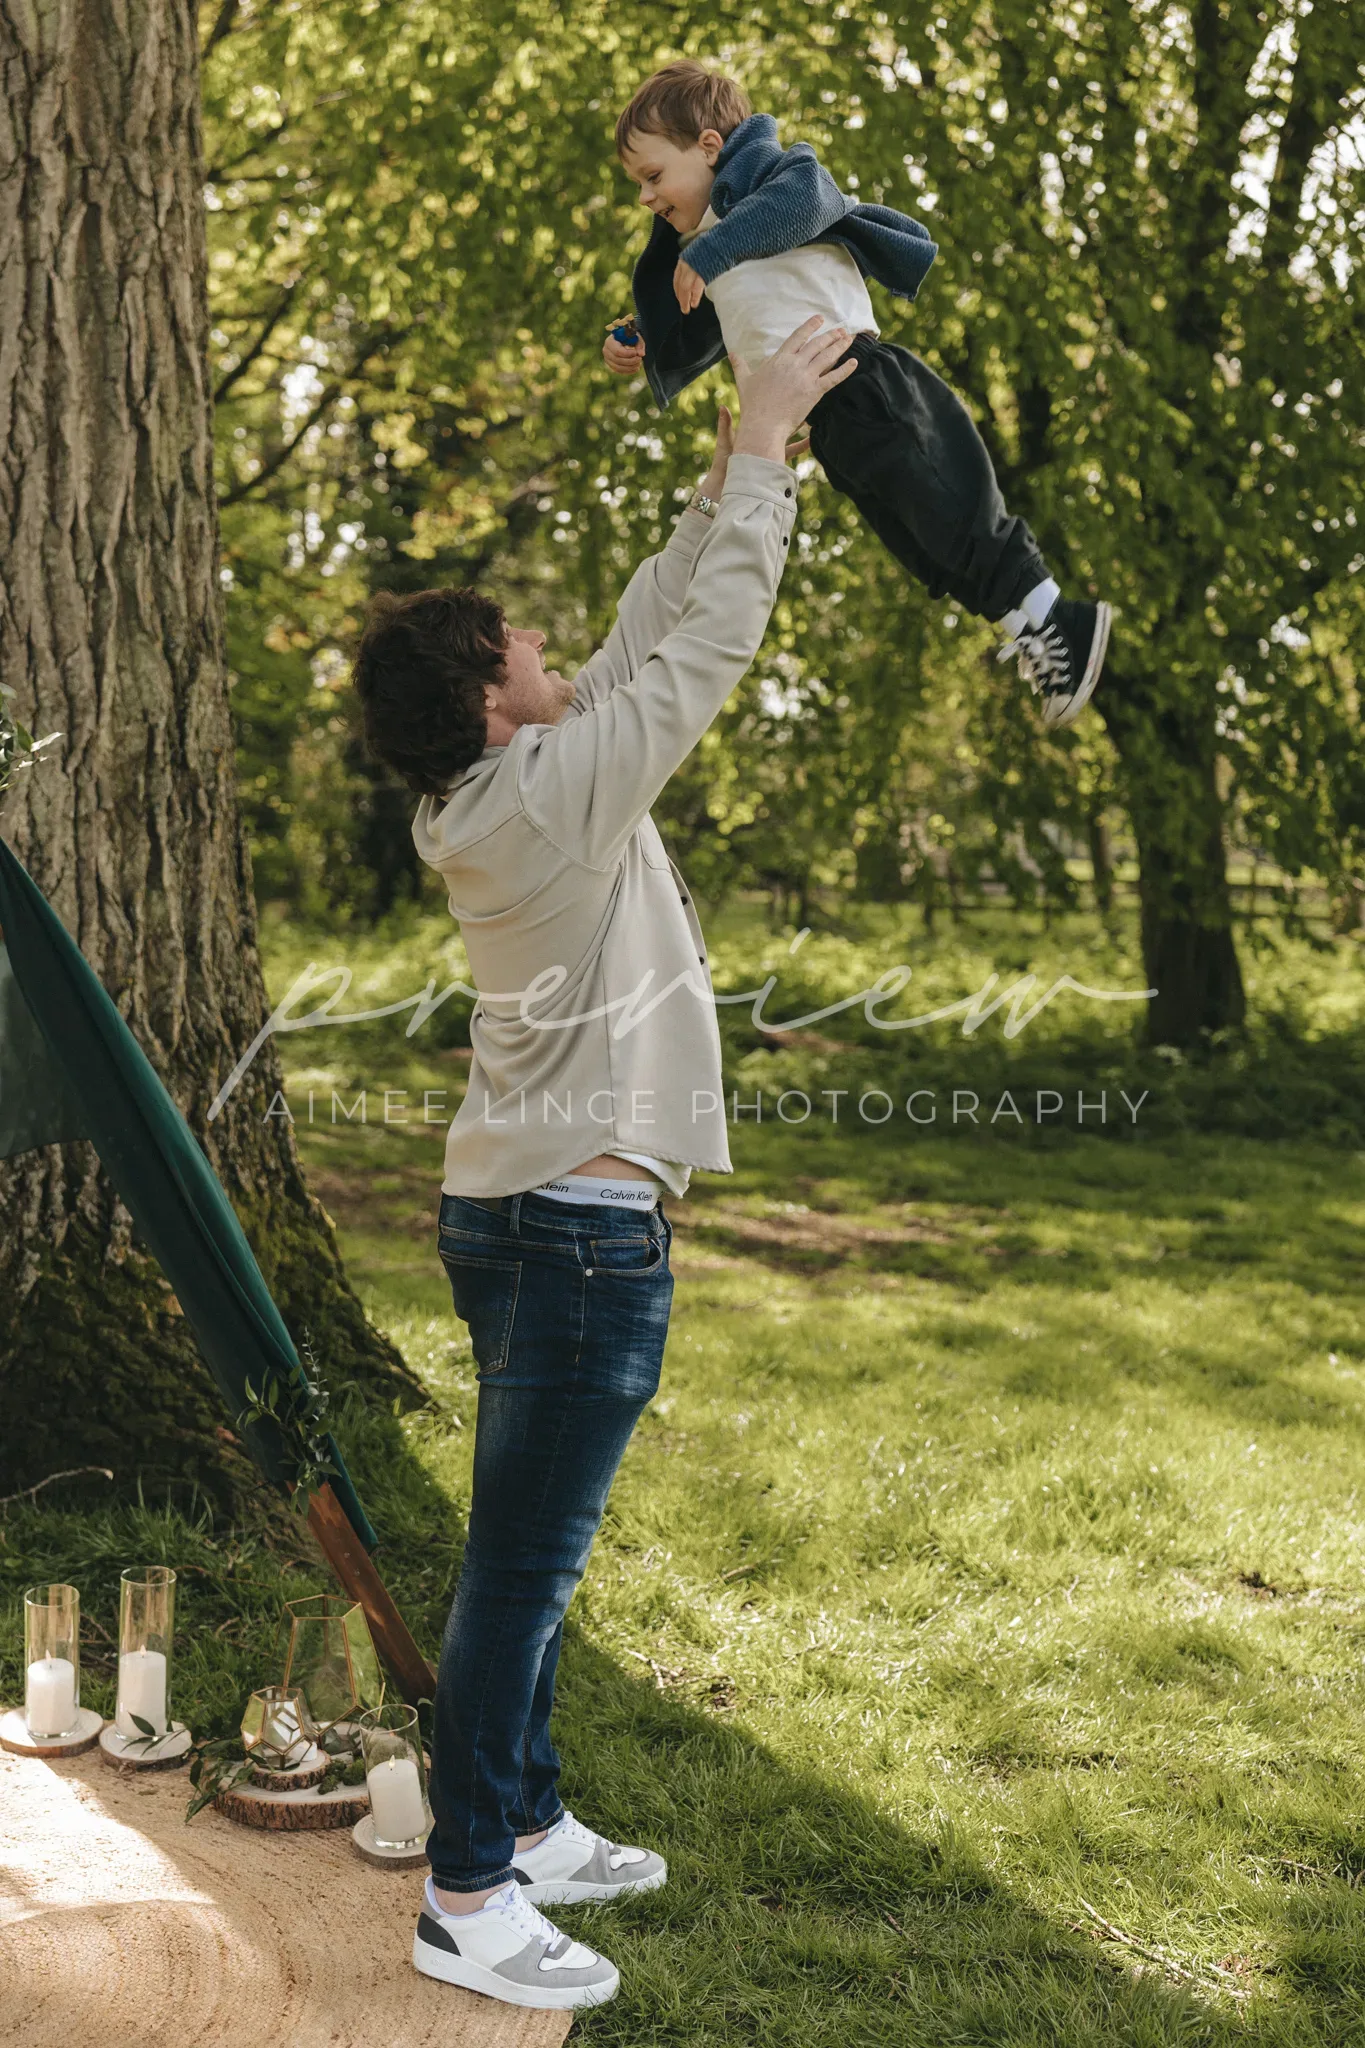 A woman, wearing a hoodie and jeans, playfully lifts a young boy in the air under a tree in a lush park. nearby, candles in glass jars are set on the ground beside a draped fabric. the setting is sunlit and verdant.